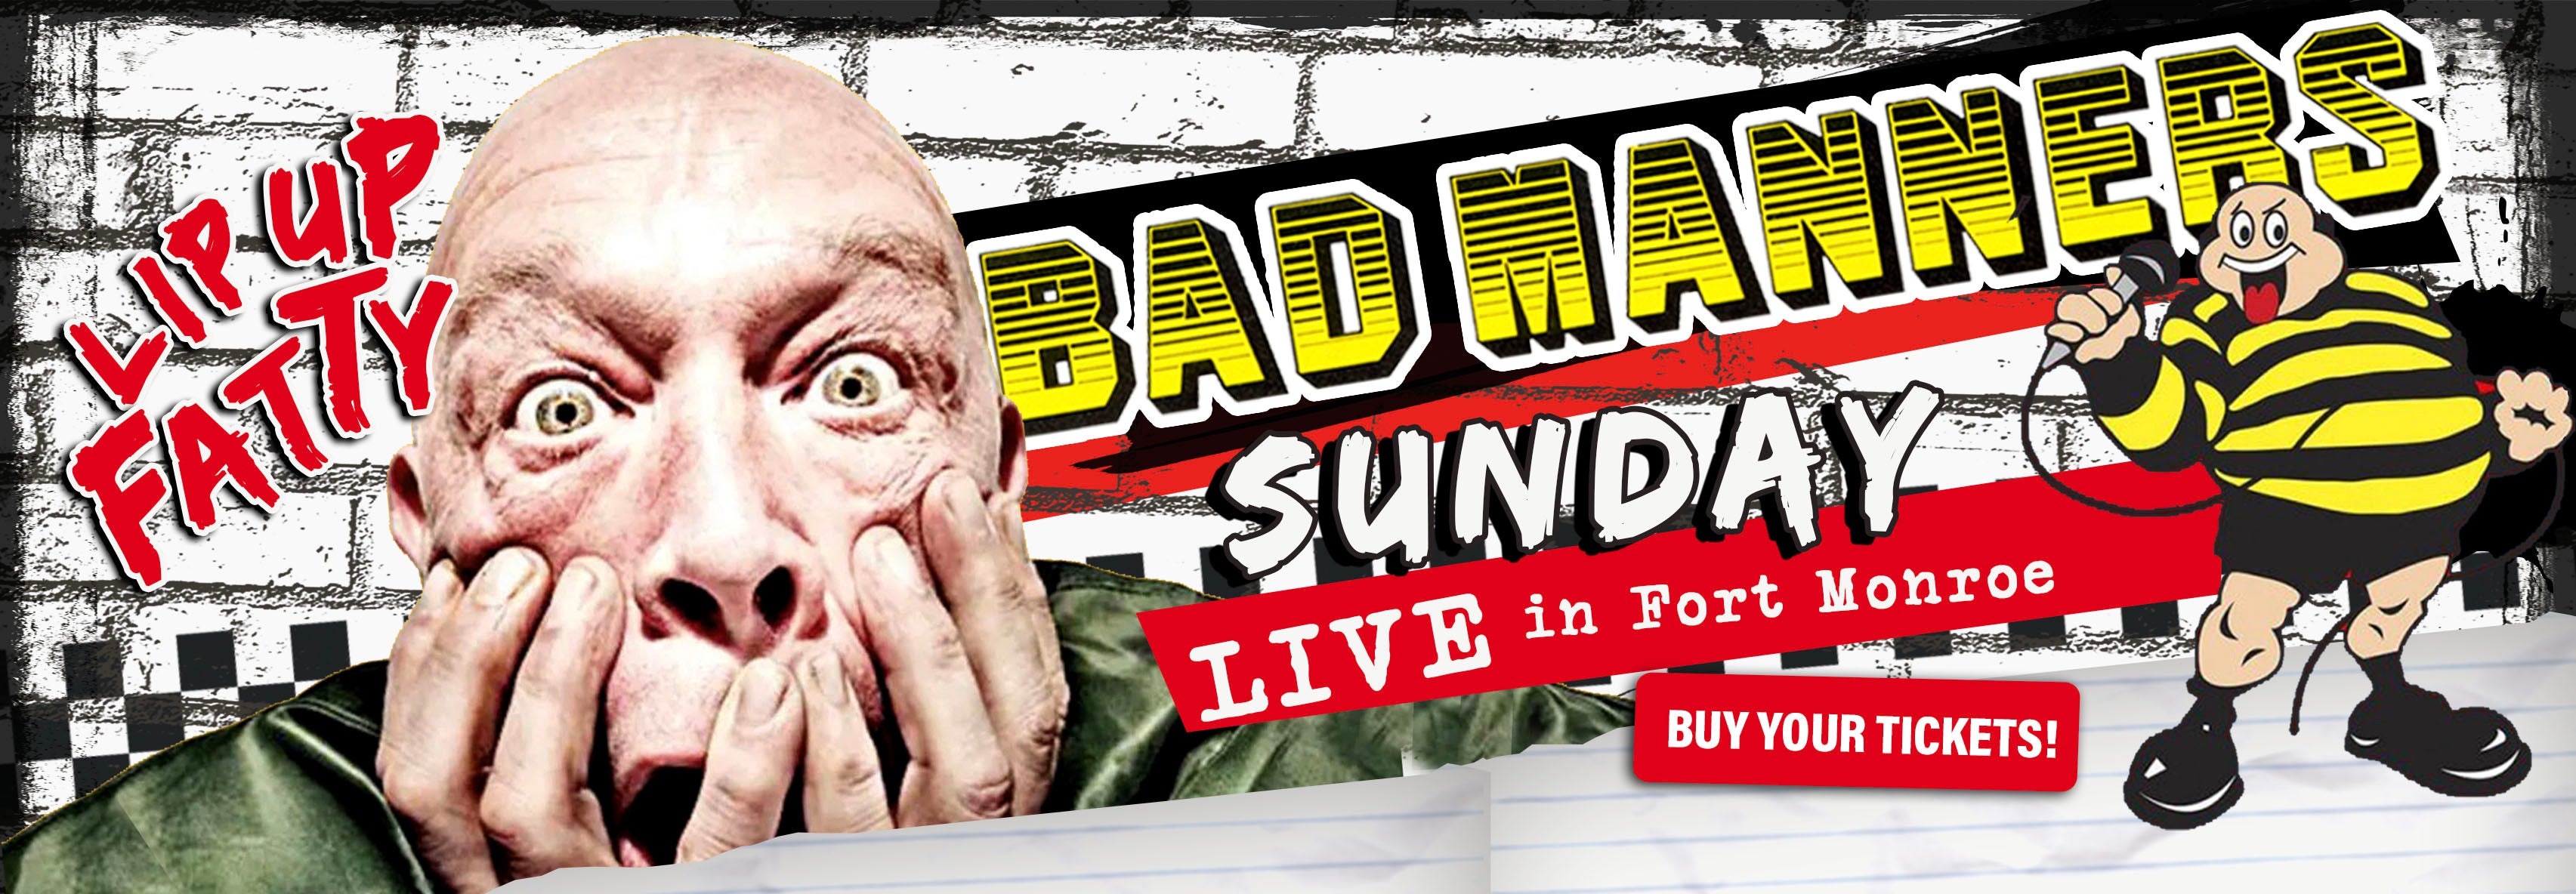 Bad Manners Sunday Live in For Monroe